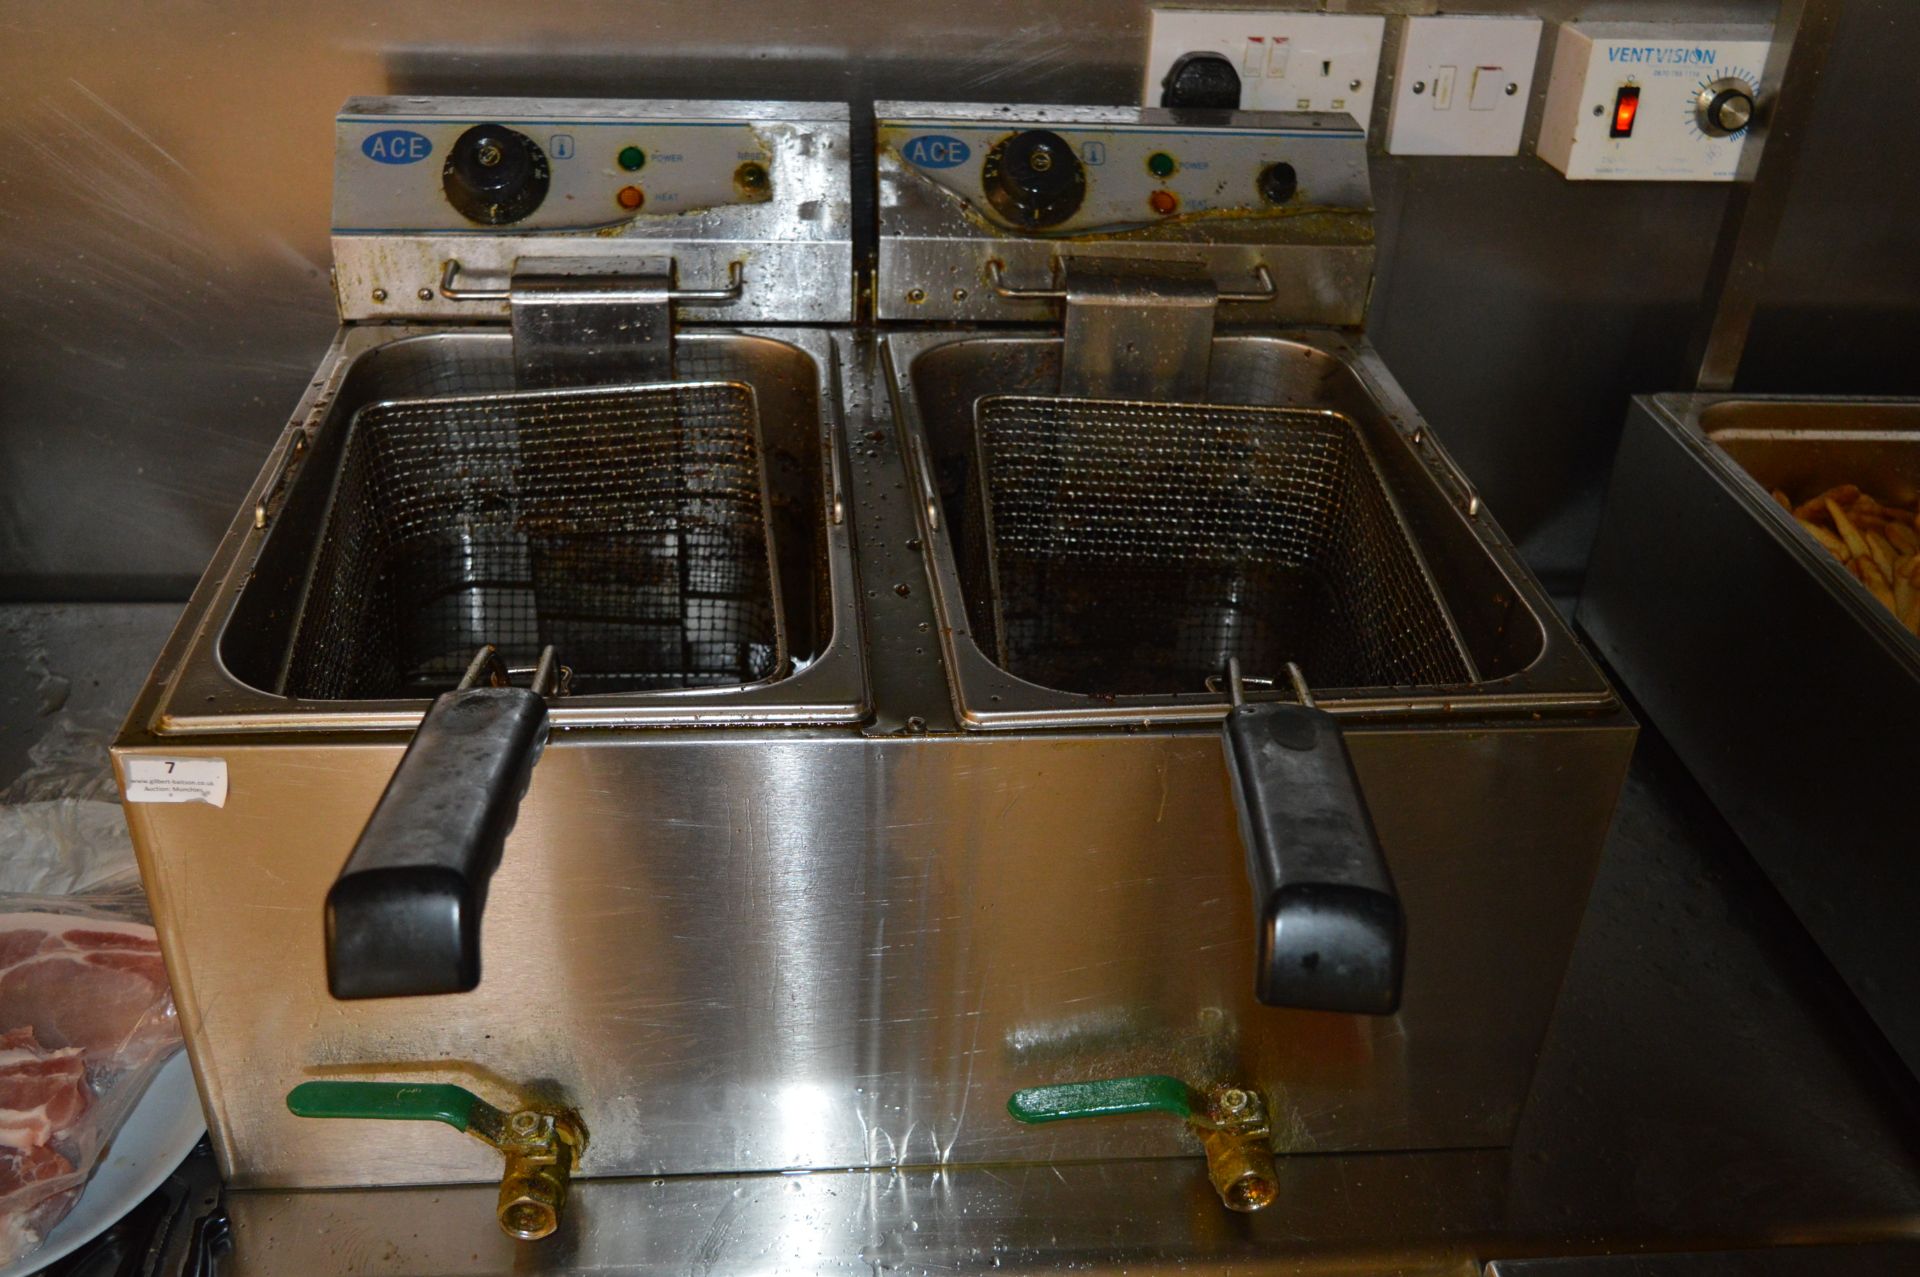 *Ace Two Basket, Two Compartment Fryer